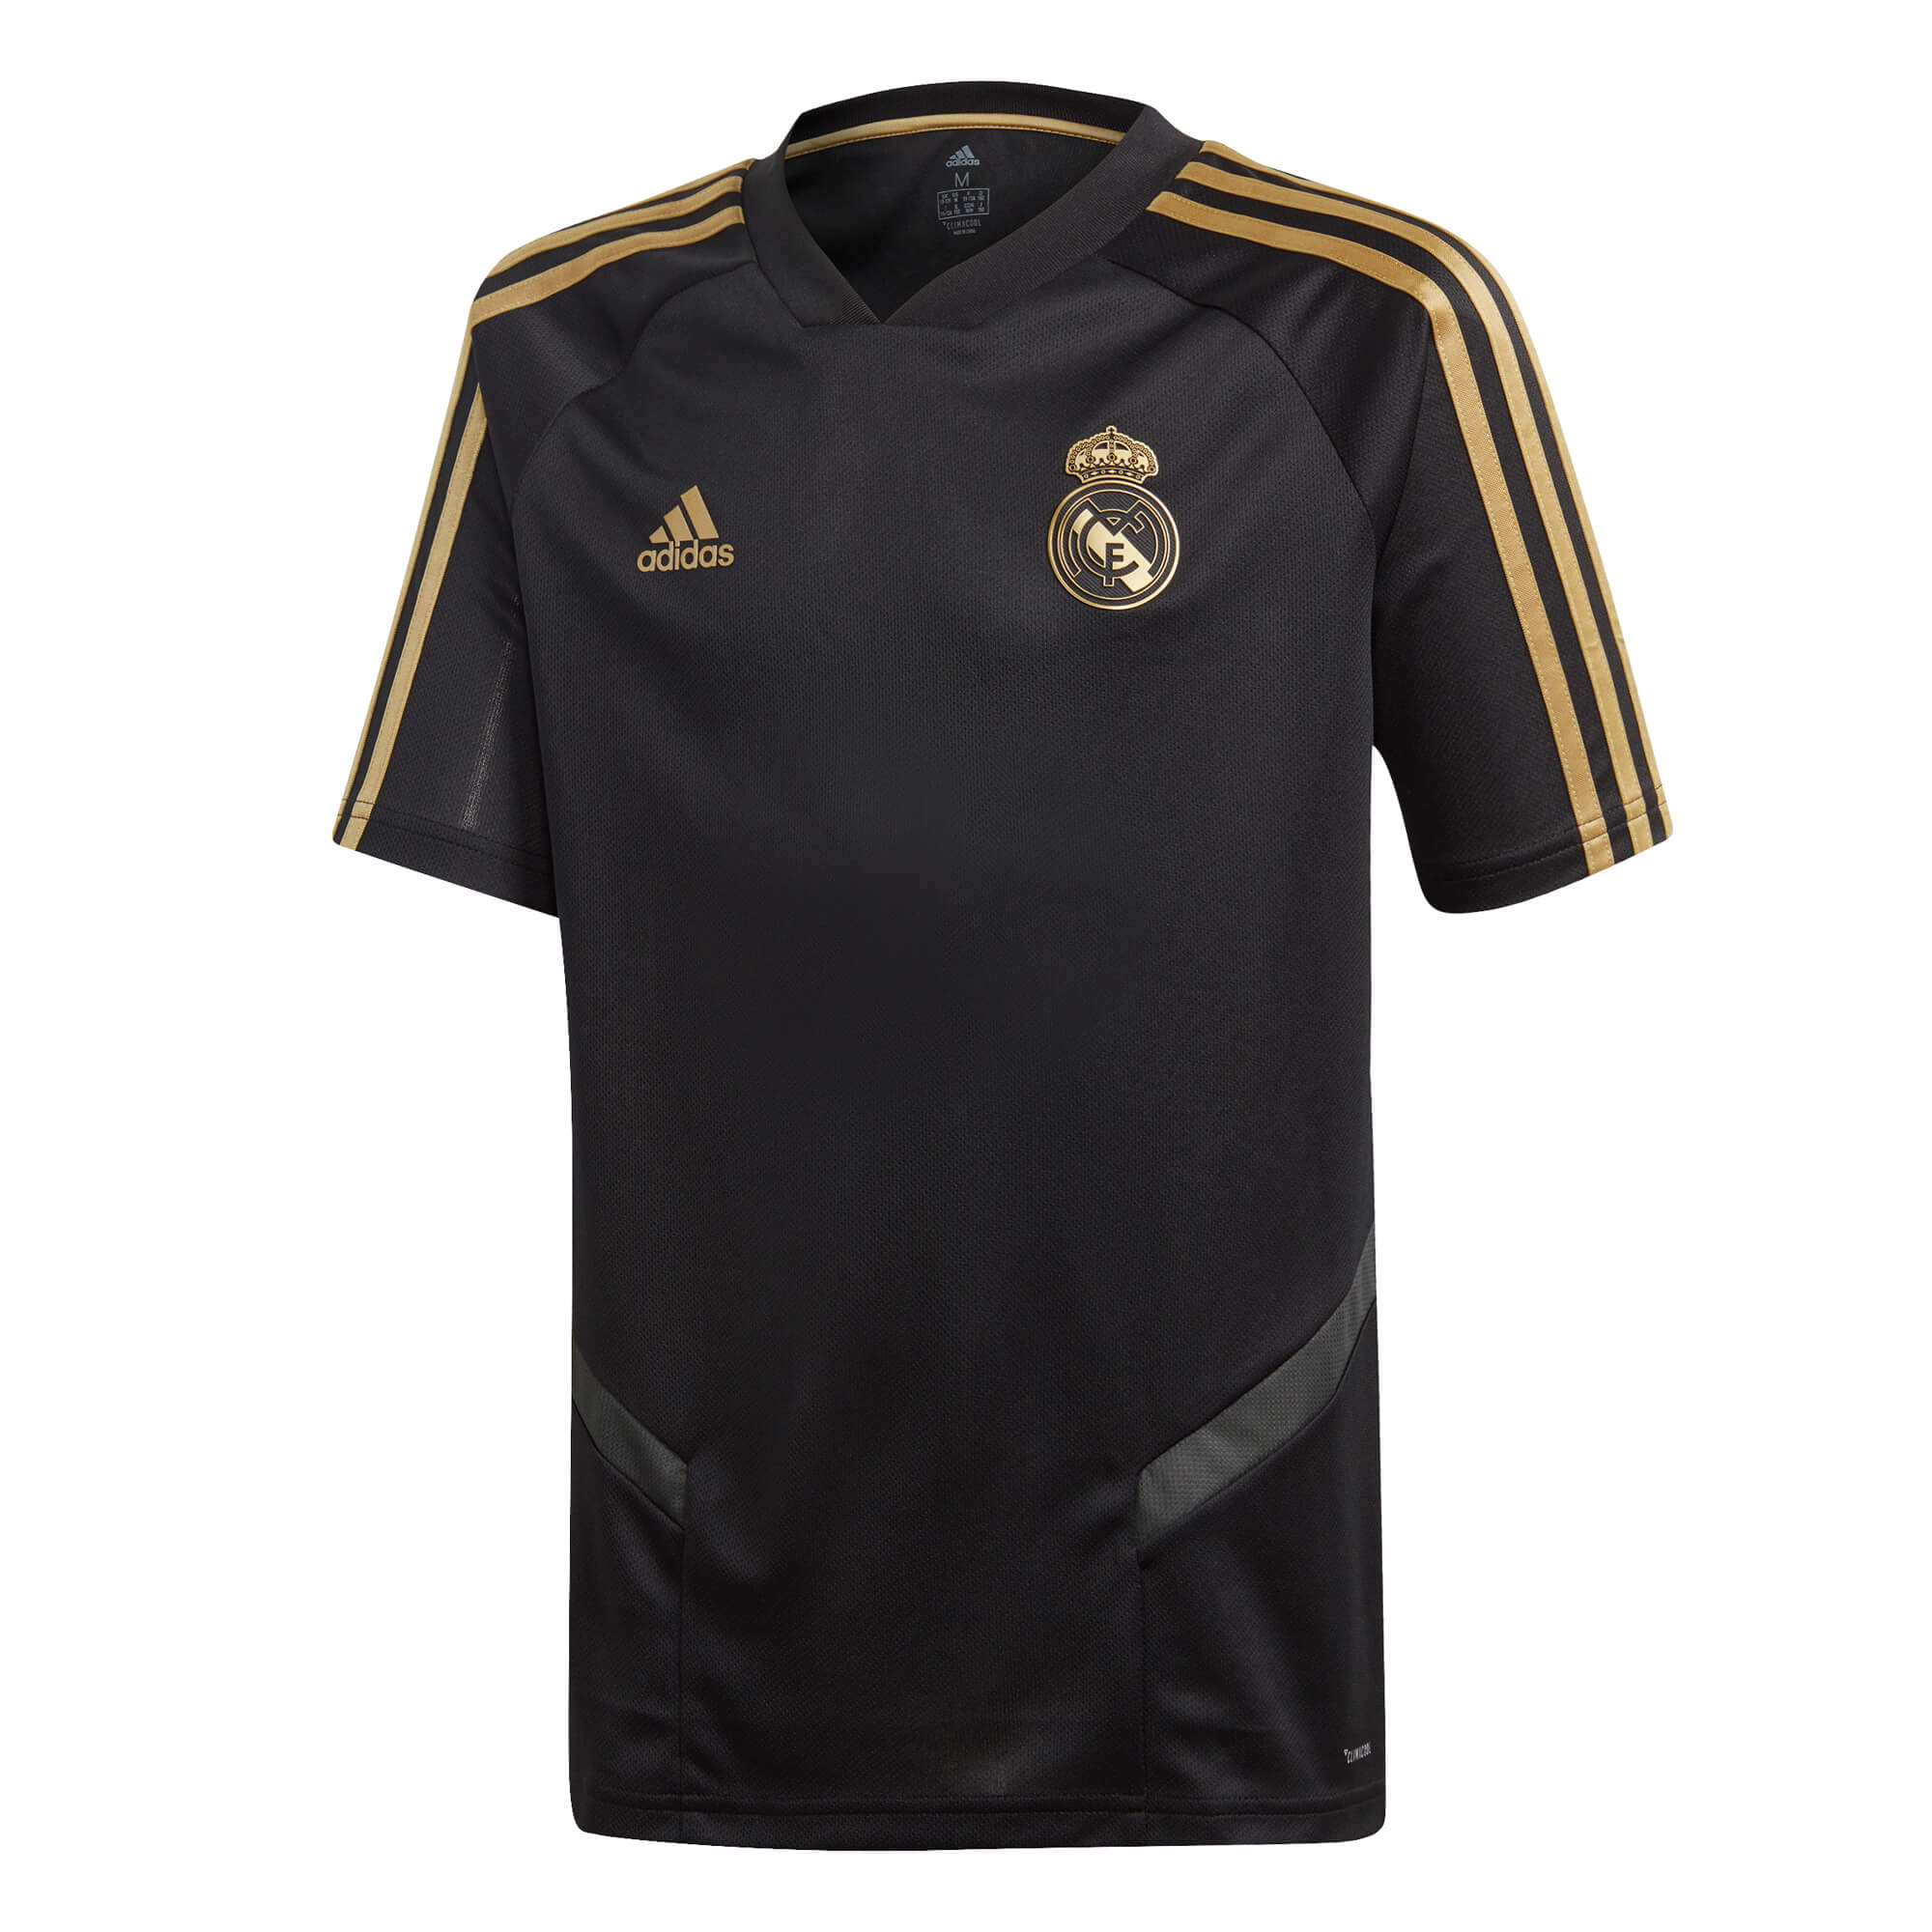 ADIDAS REAL MADRID MAILLOT ENTRAINEMENT JUNIOR NOIR 2019/2020